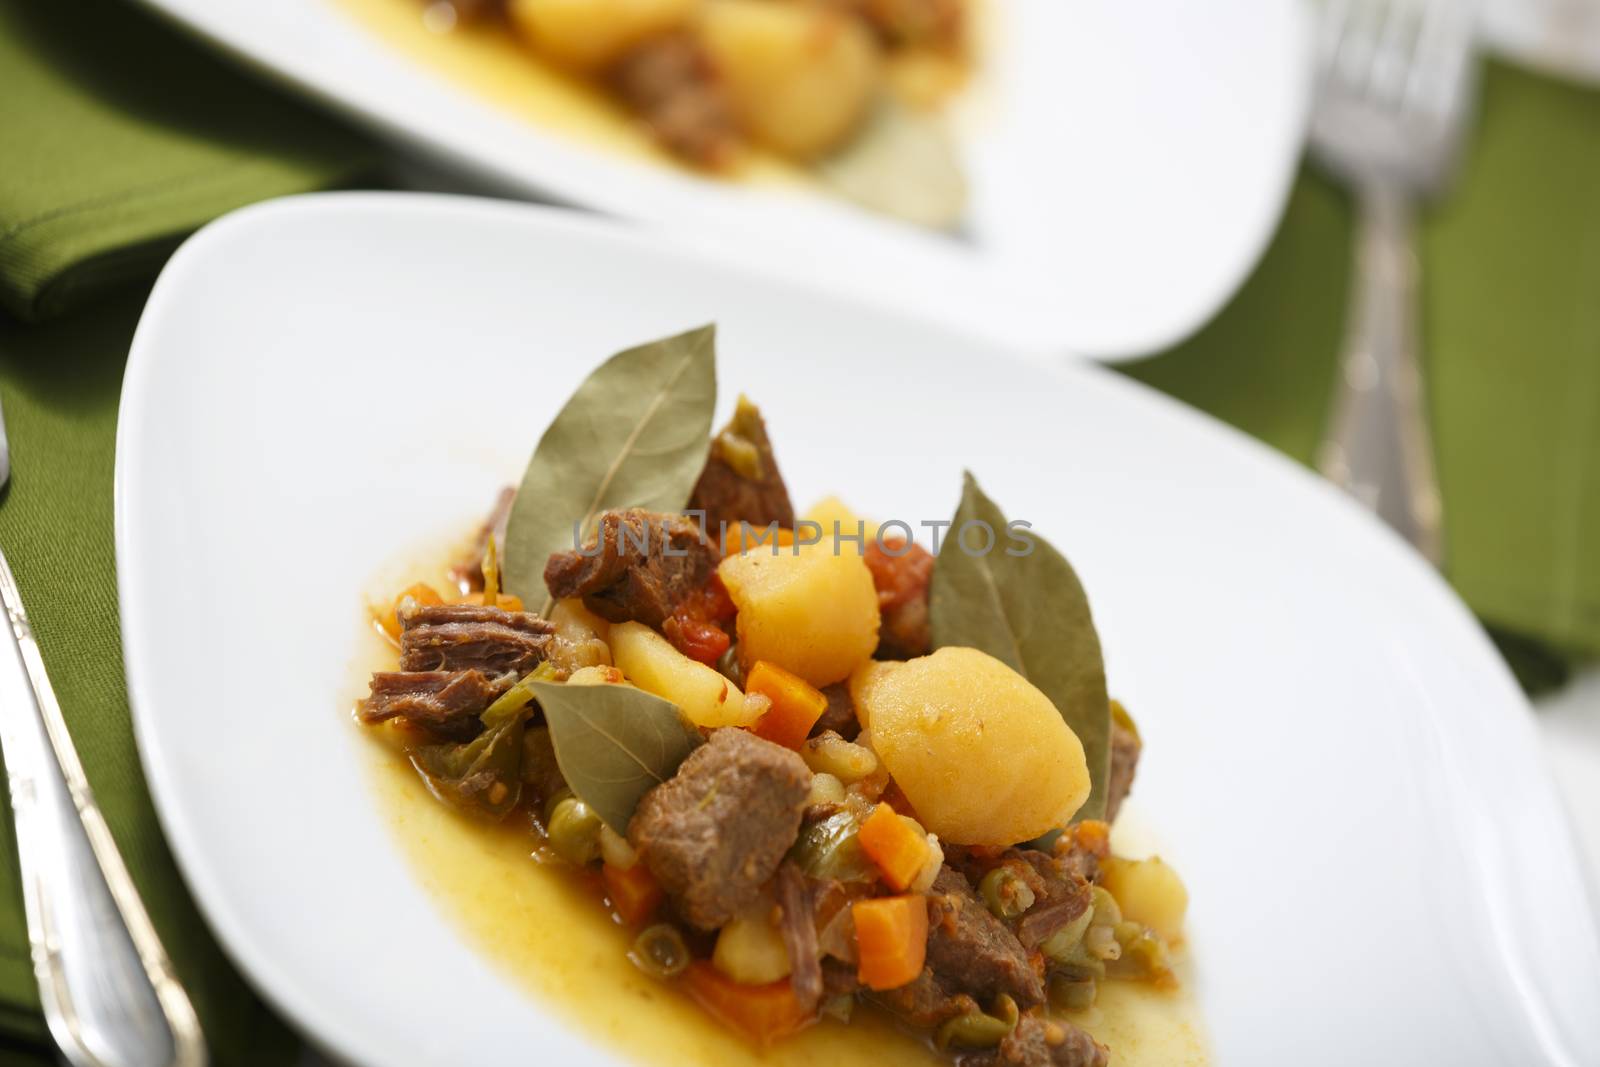 Beef stew with potatos and carrots.